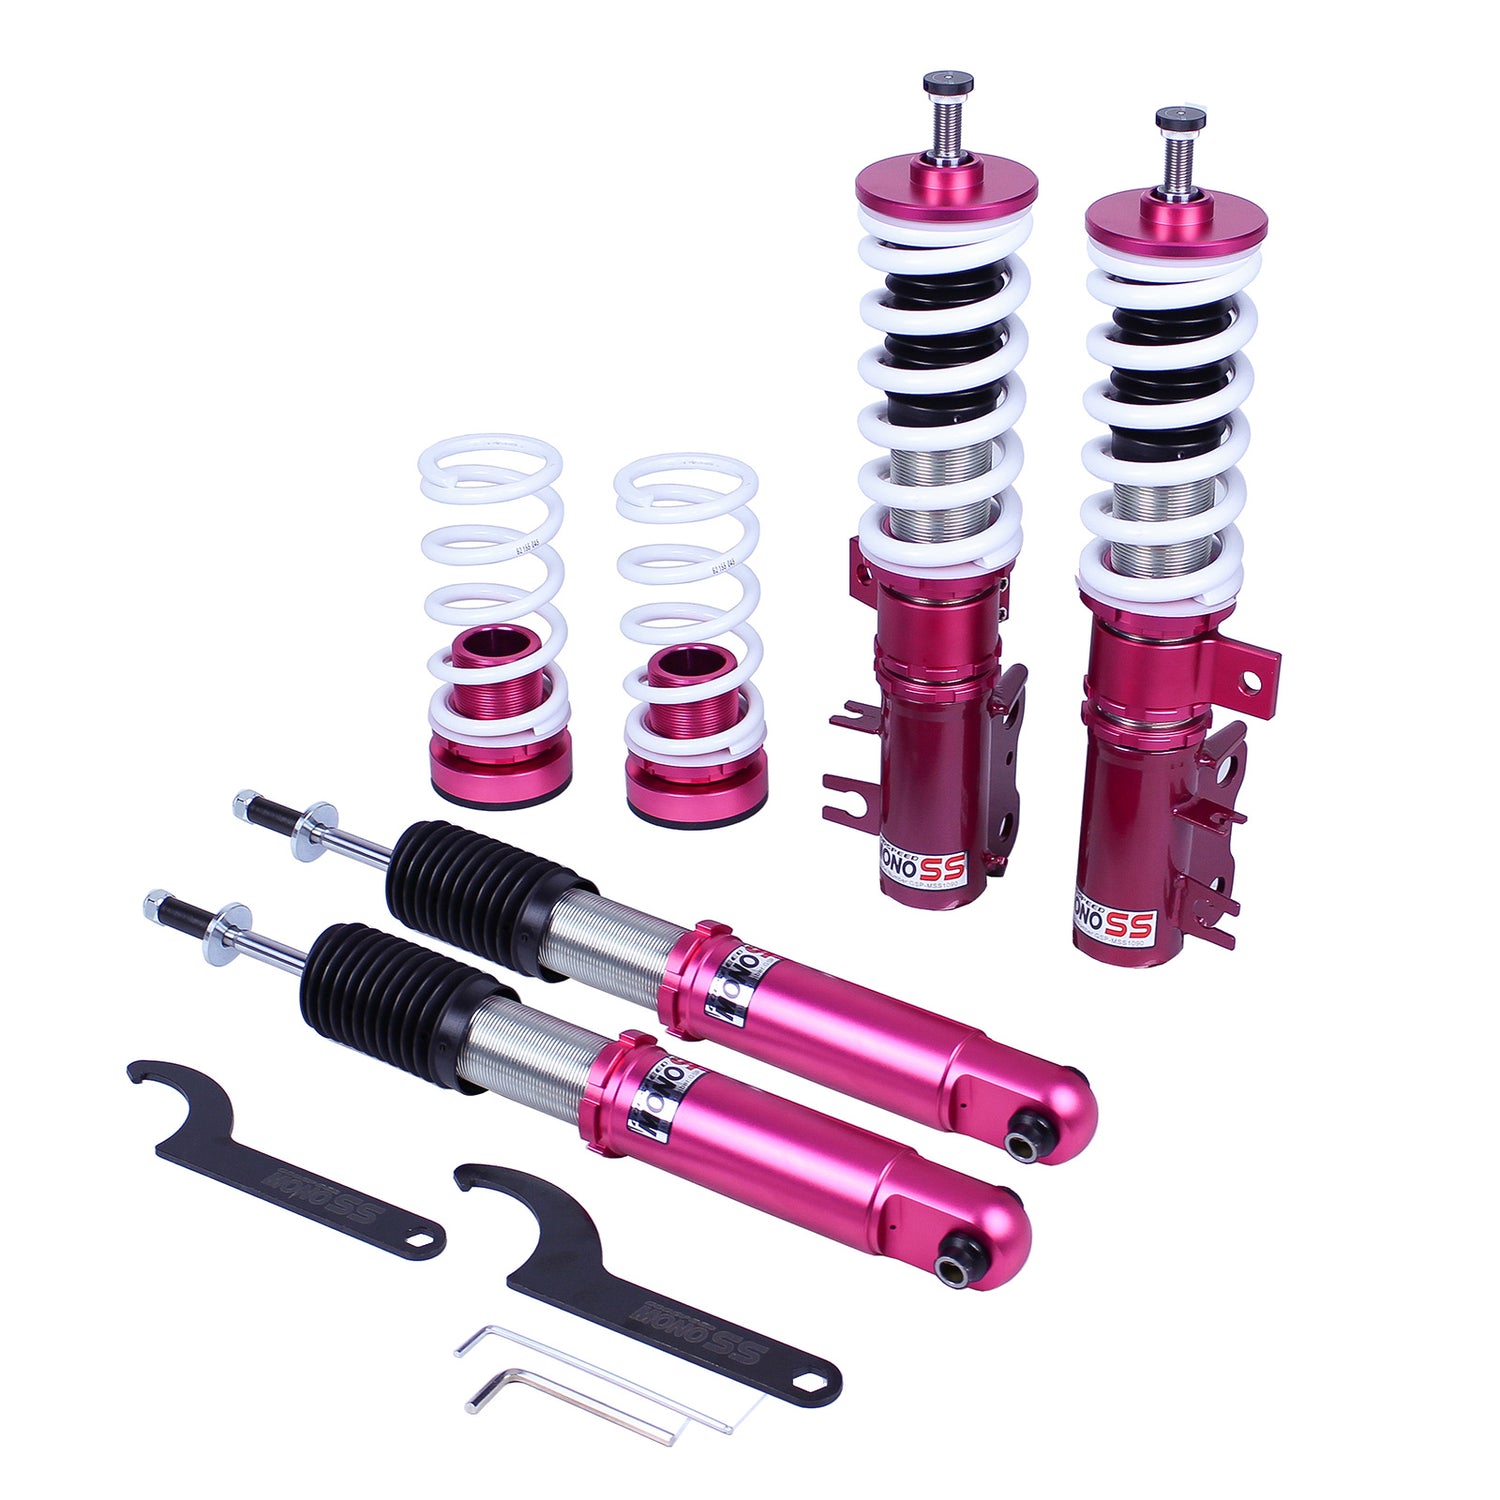 Godspeed MSS1090 MonoSS Coilover Lowering Kit, Fully Adjustable, Ride Height, Spring Tension And 16 Click Damping, Chevrolet Sonic(T300) 2012-19